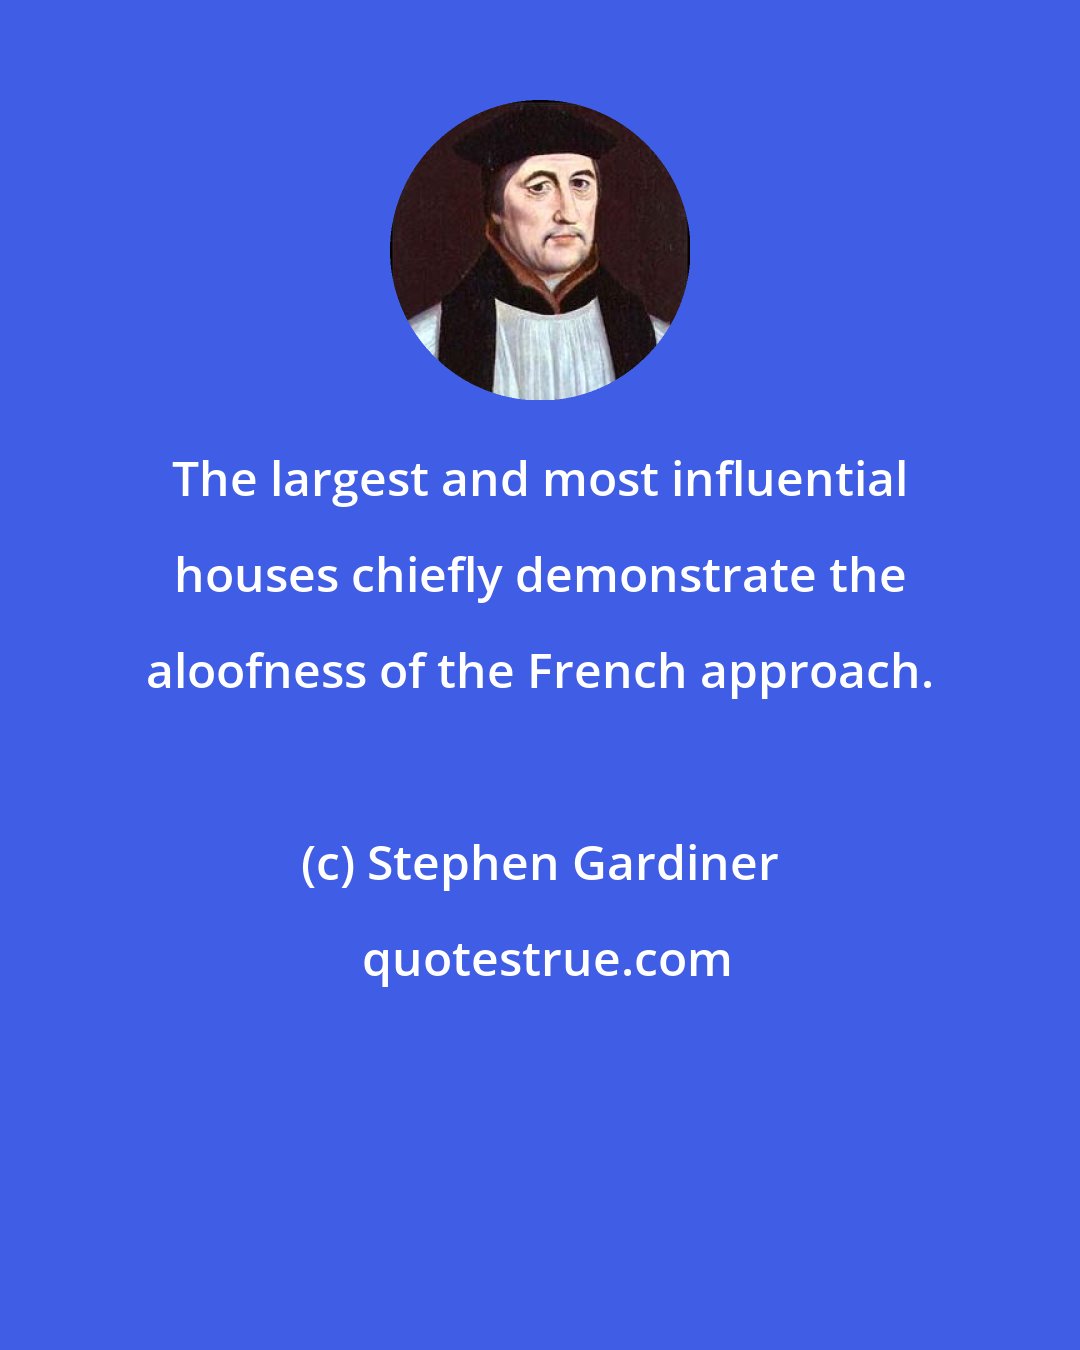 Stephen Gardiner: The largest and most influential houses chiefly demonstrate the aloofness of the French approach.